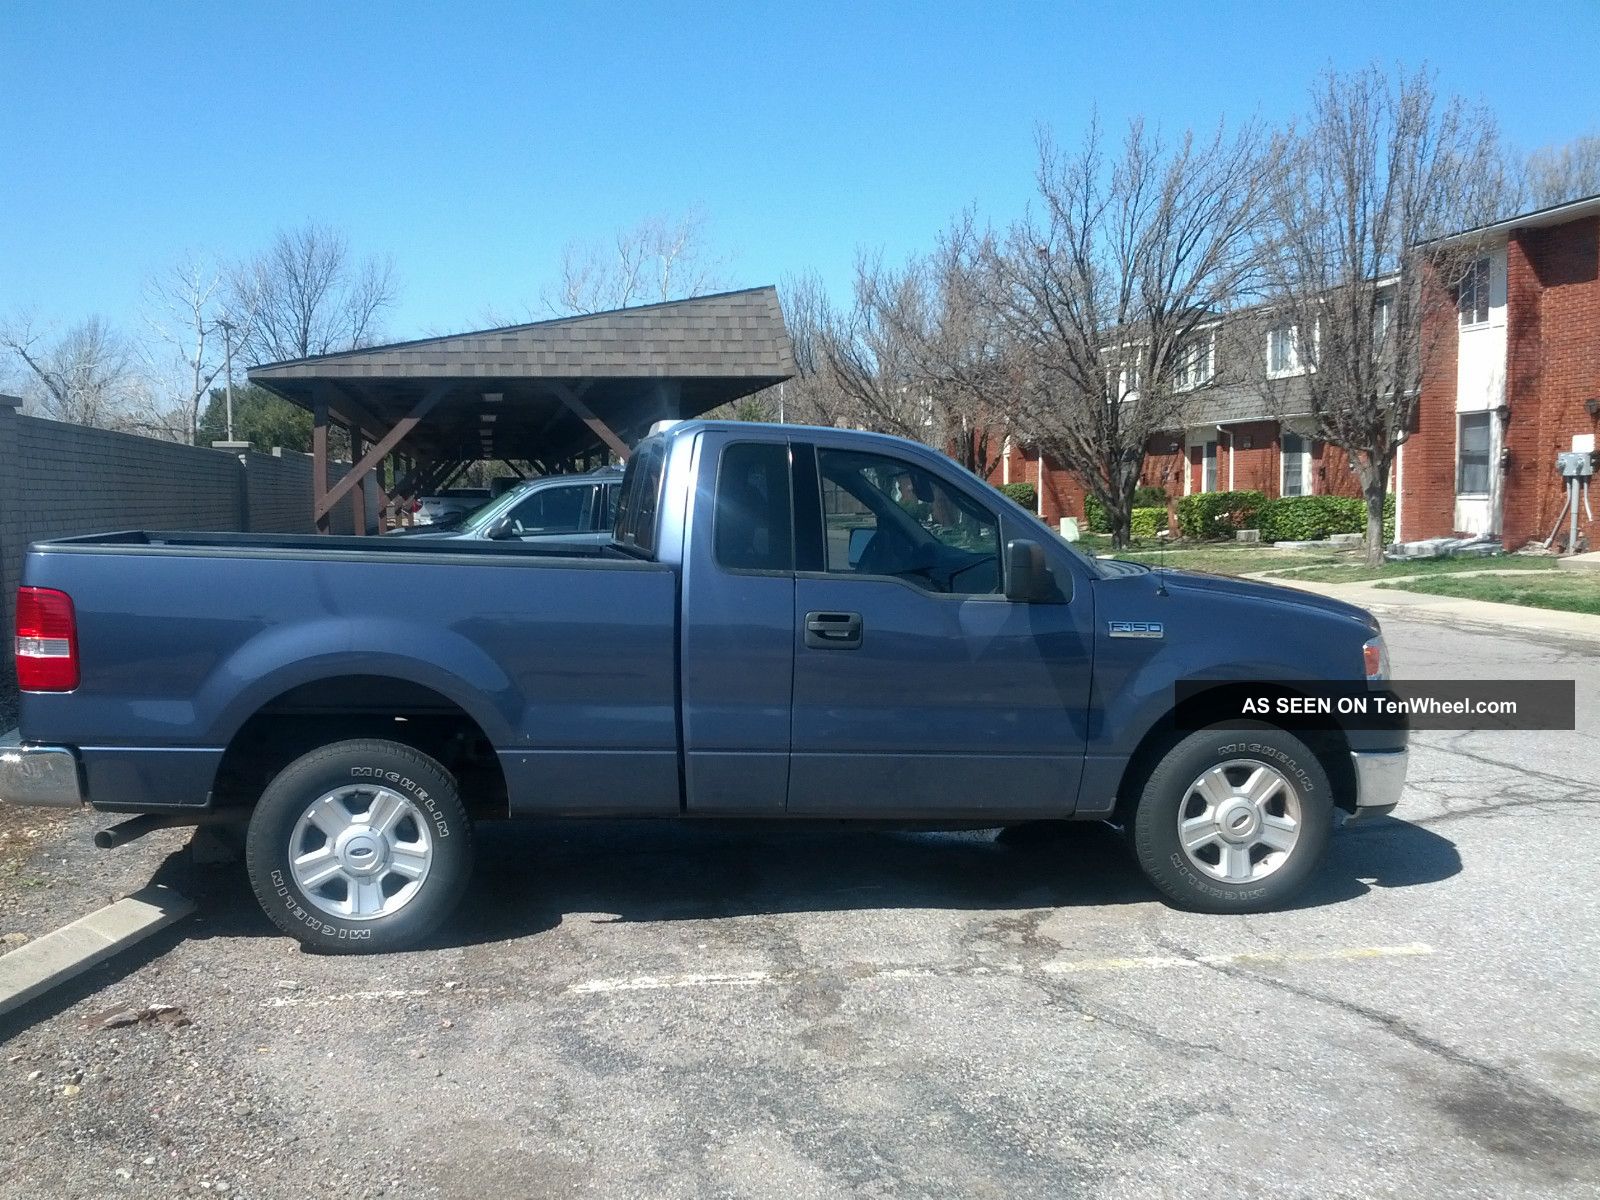 2004 Ford F 150 Xlt Extended Cab Pickup 4 Door 4 6l